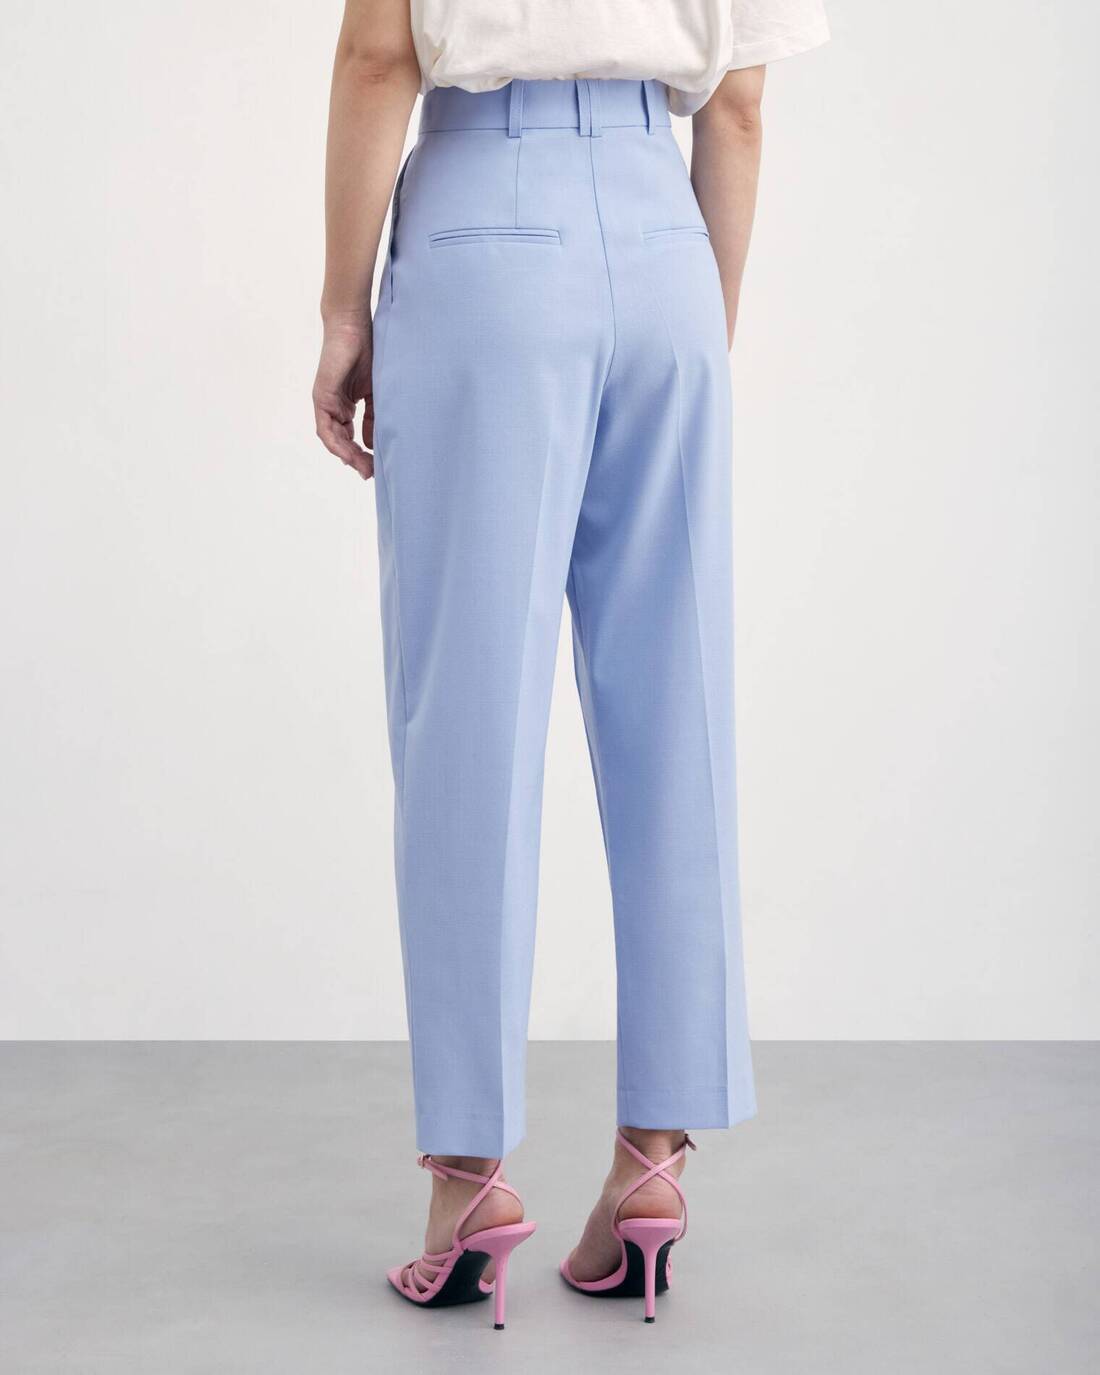 Pintuck trousers